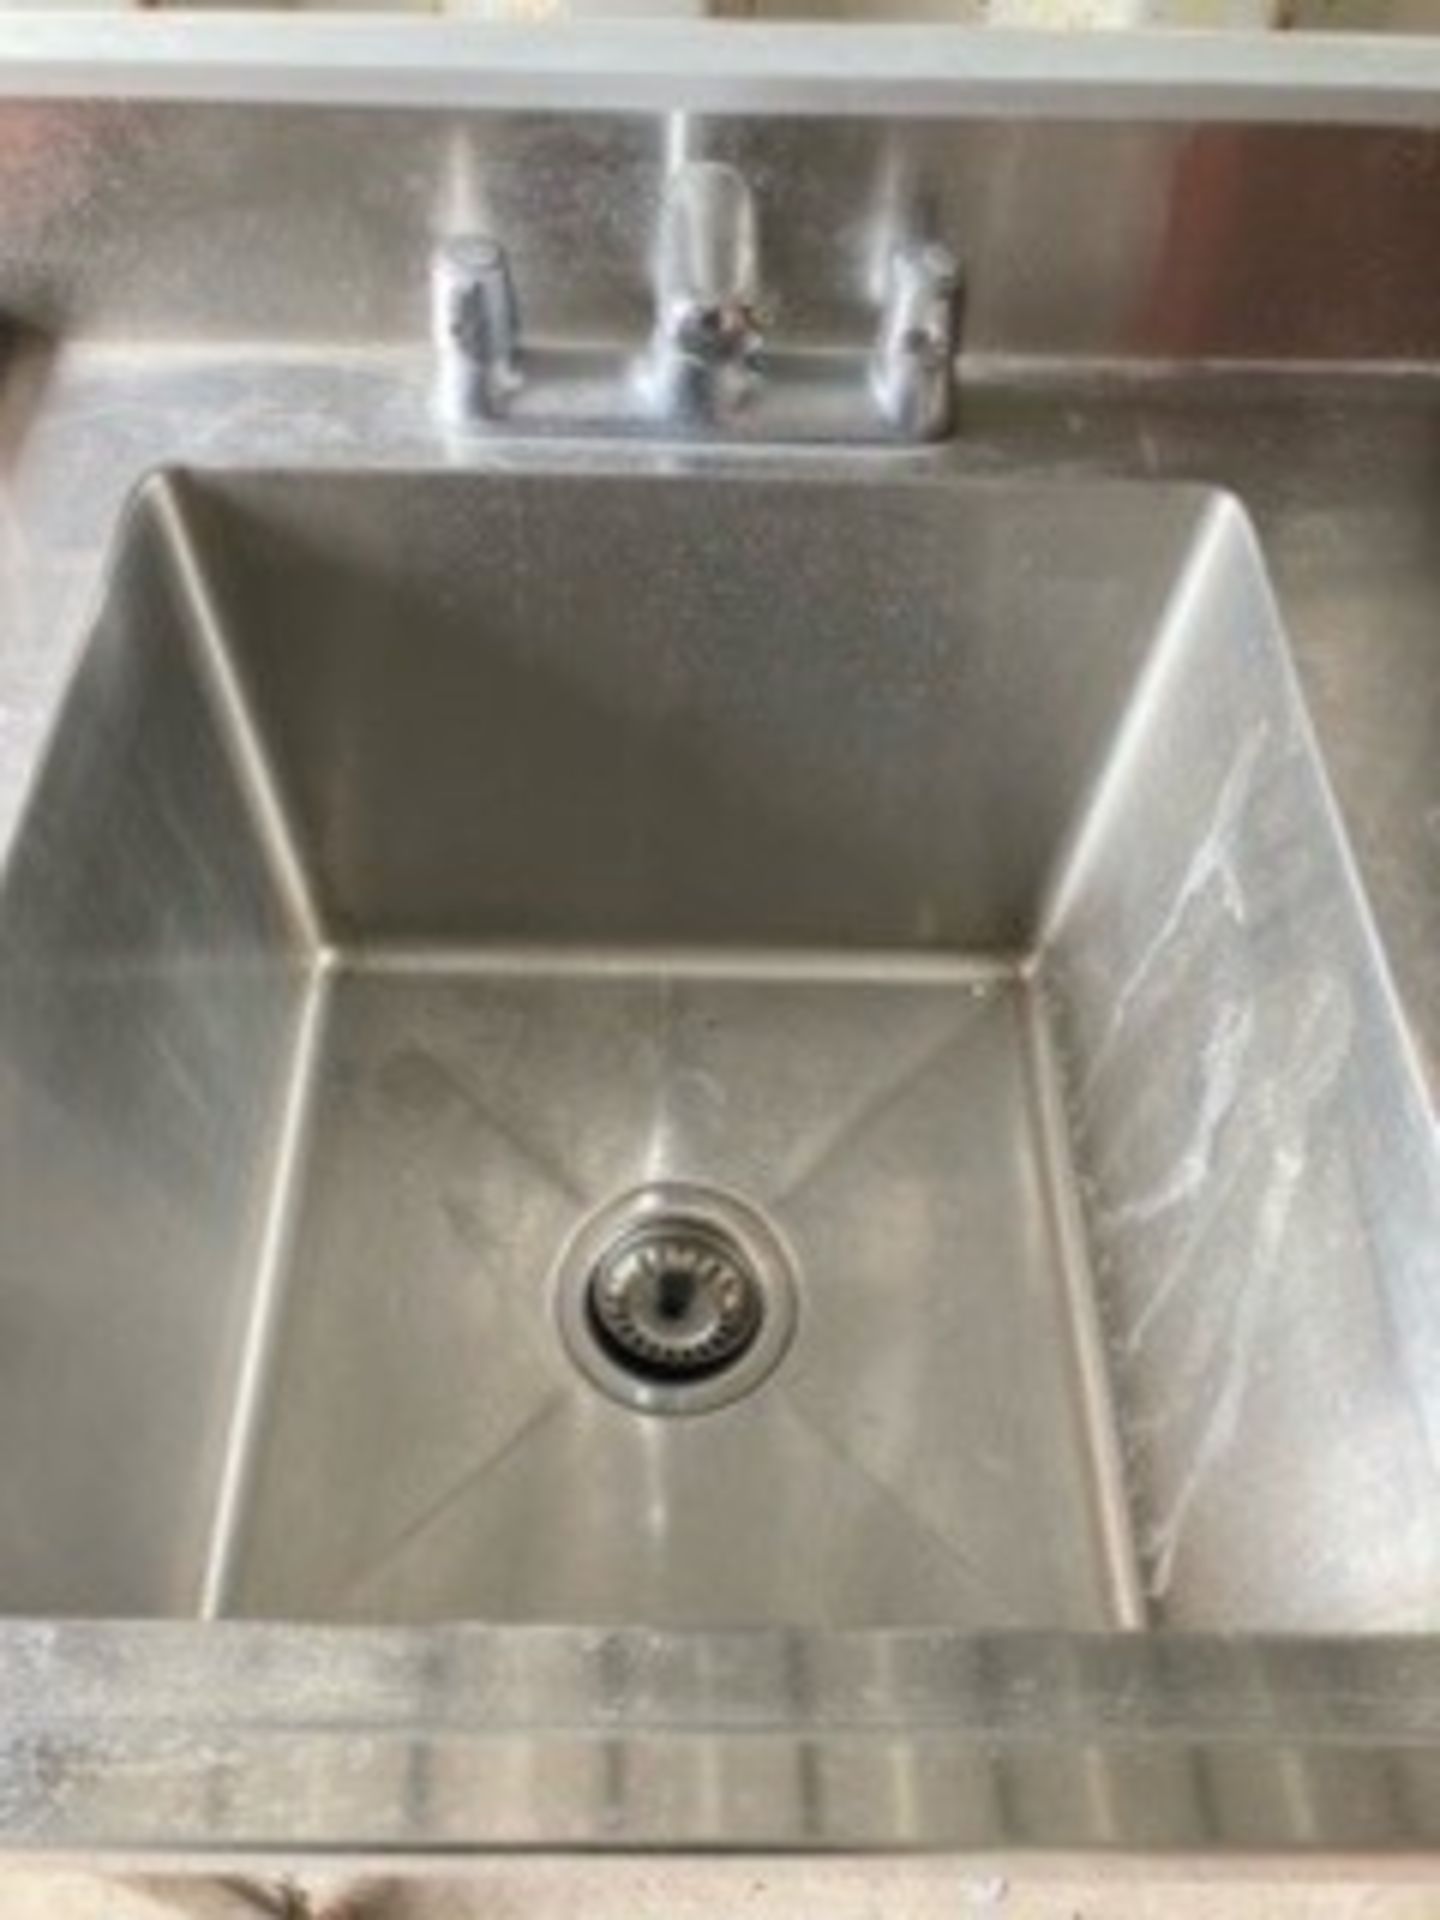 Simply Stainless Steel Preparation Table With Sink - Image 5 of 5